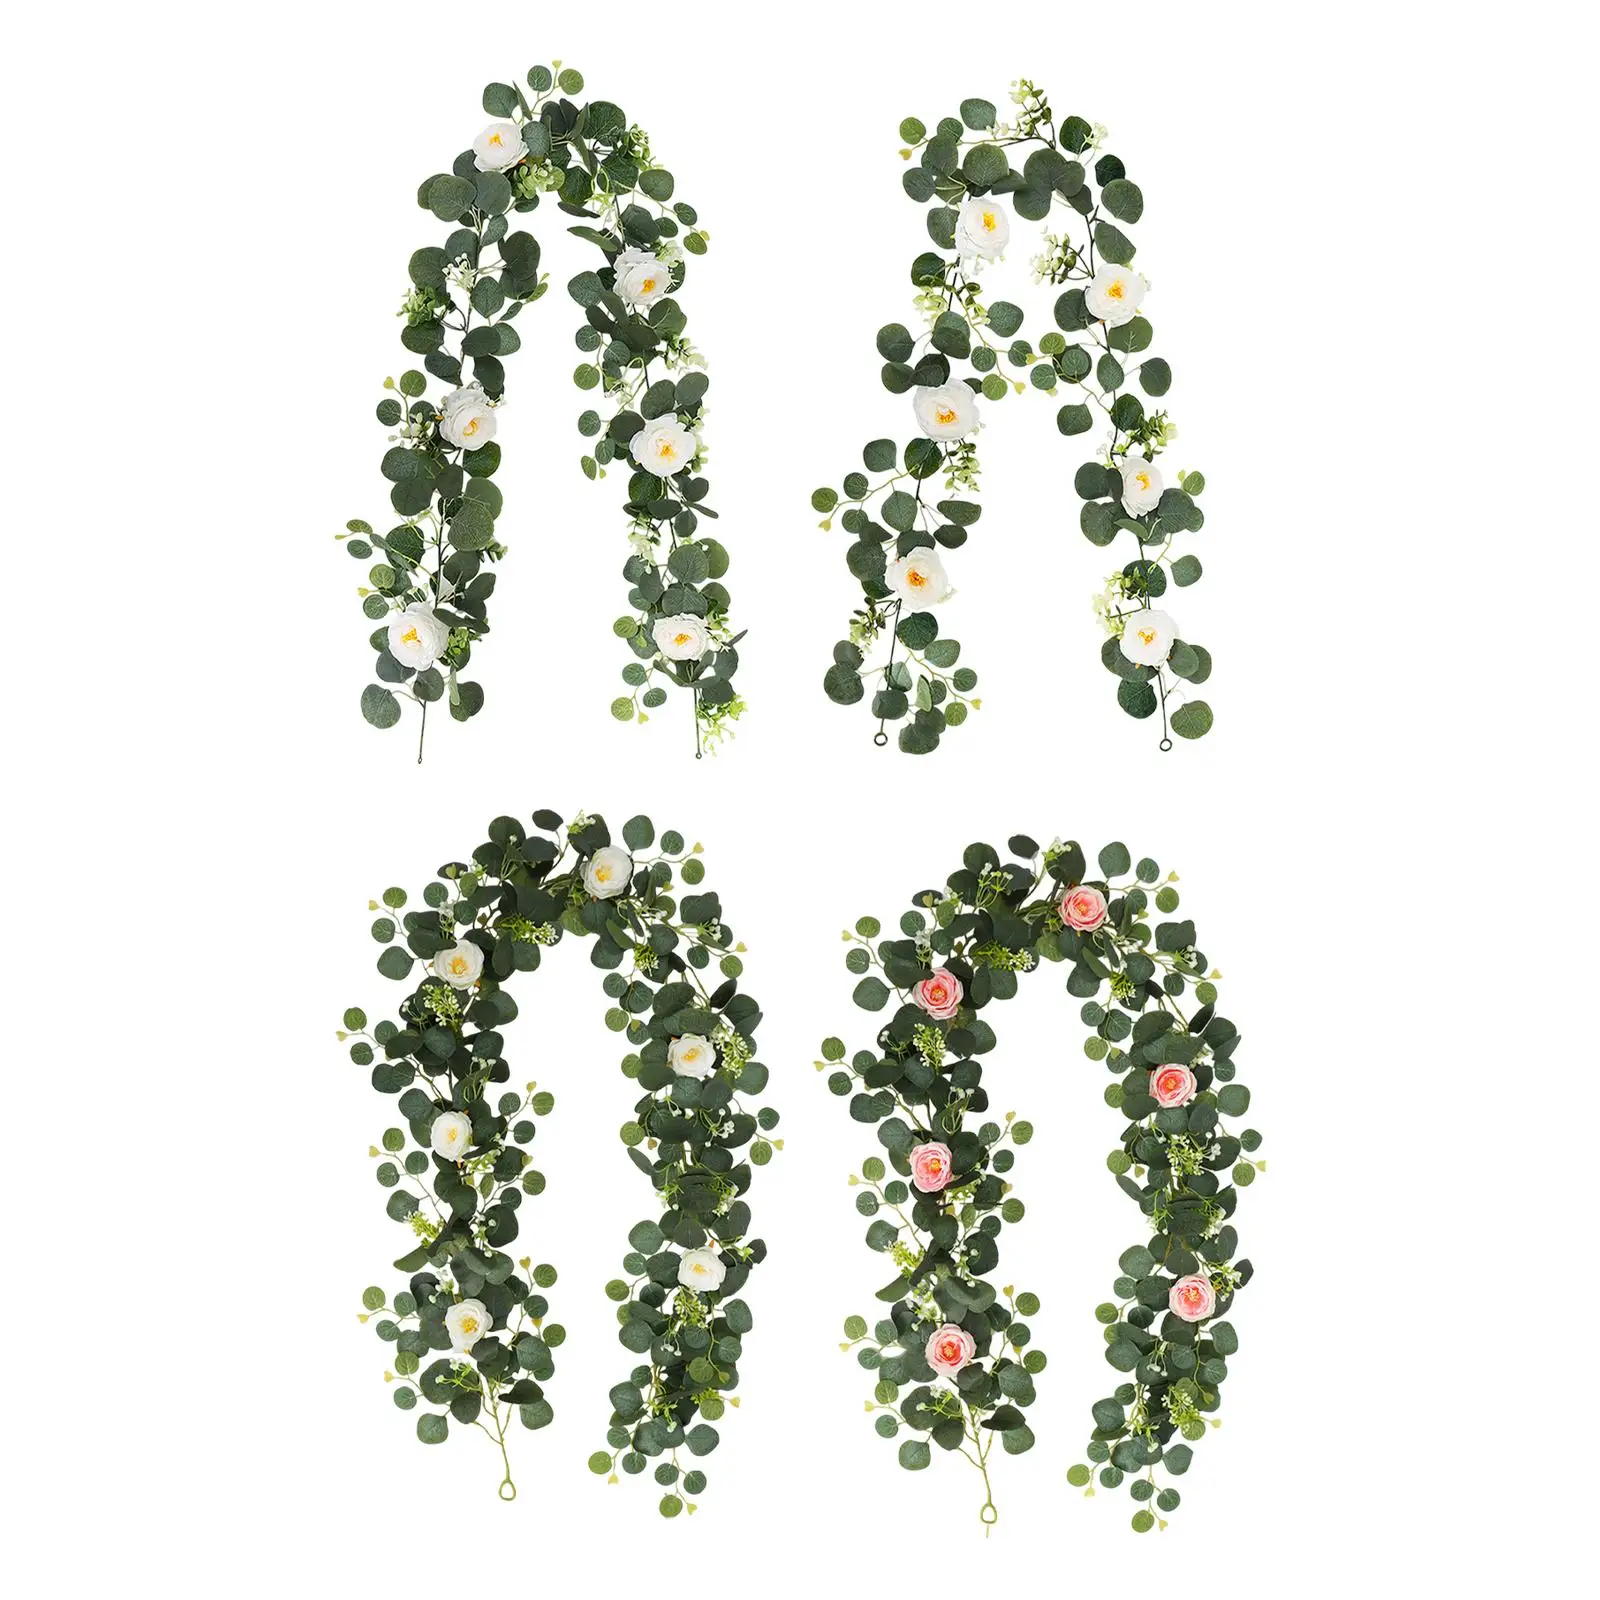 Artificial Green Leaf Vines Eucalyptus Garland with Flowers Table Centerpiece, Floral Vines for Door Home Holiday Wall Decor